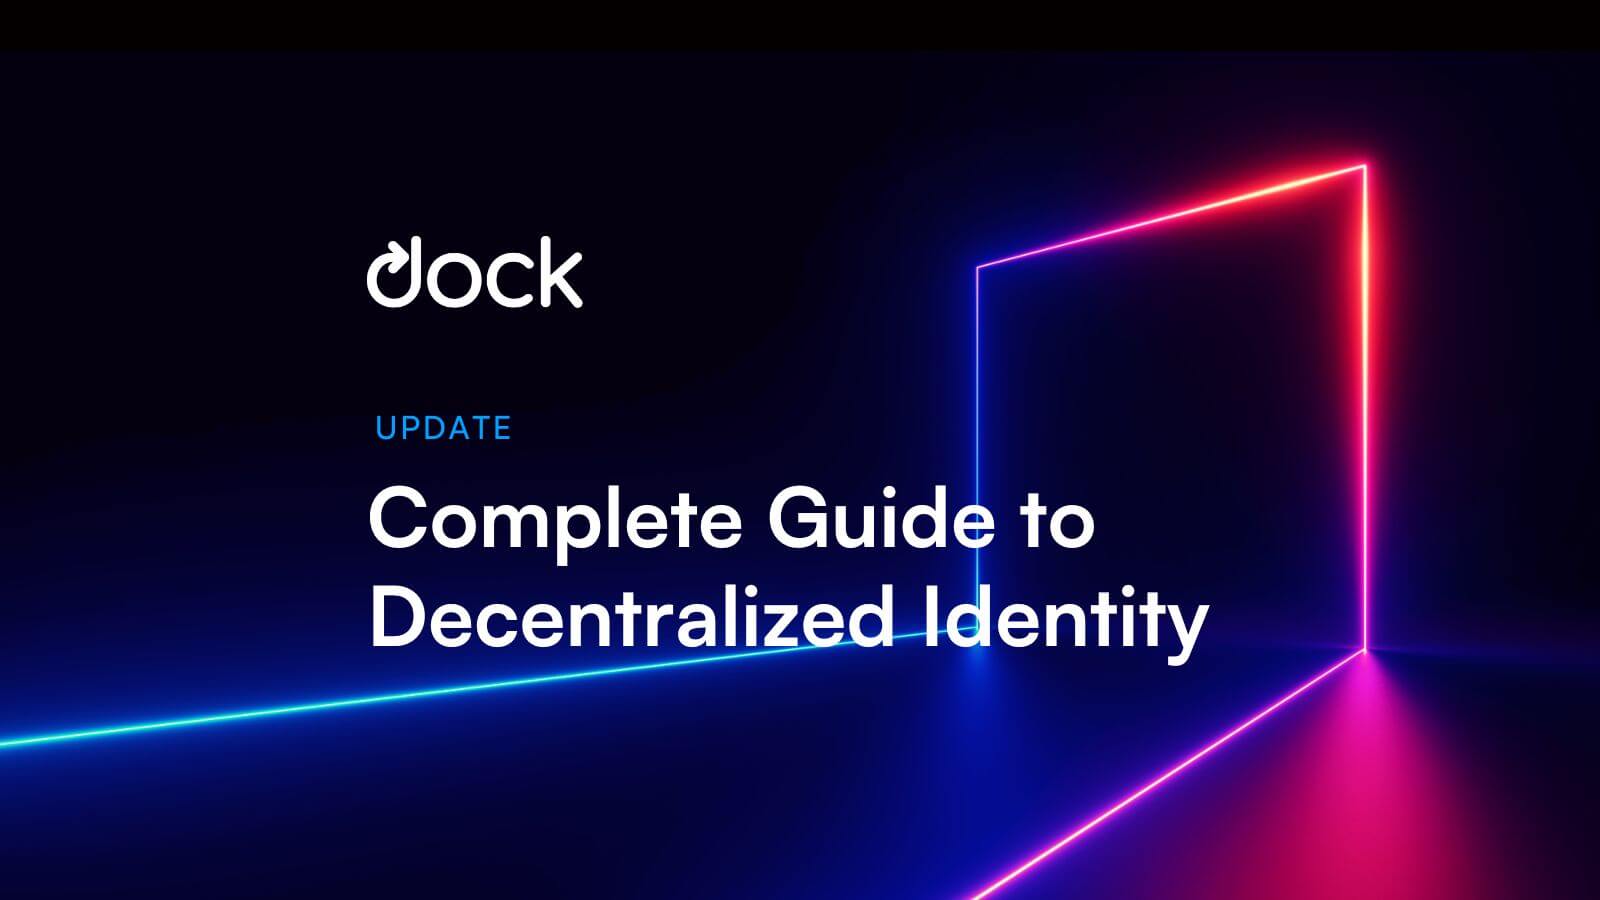 Decentralized Identity Using Blockchain: The Ultimate Guide 2022